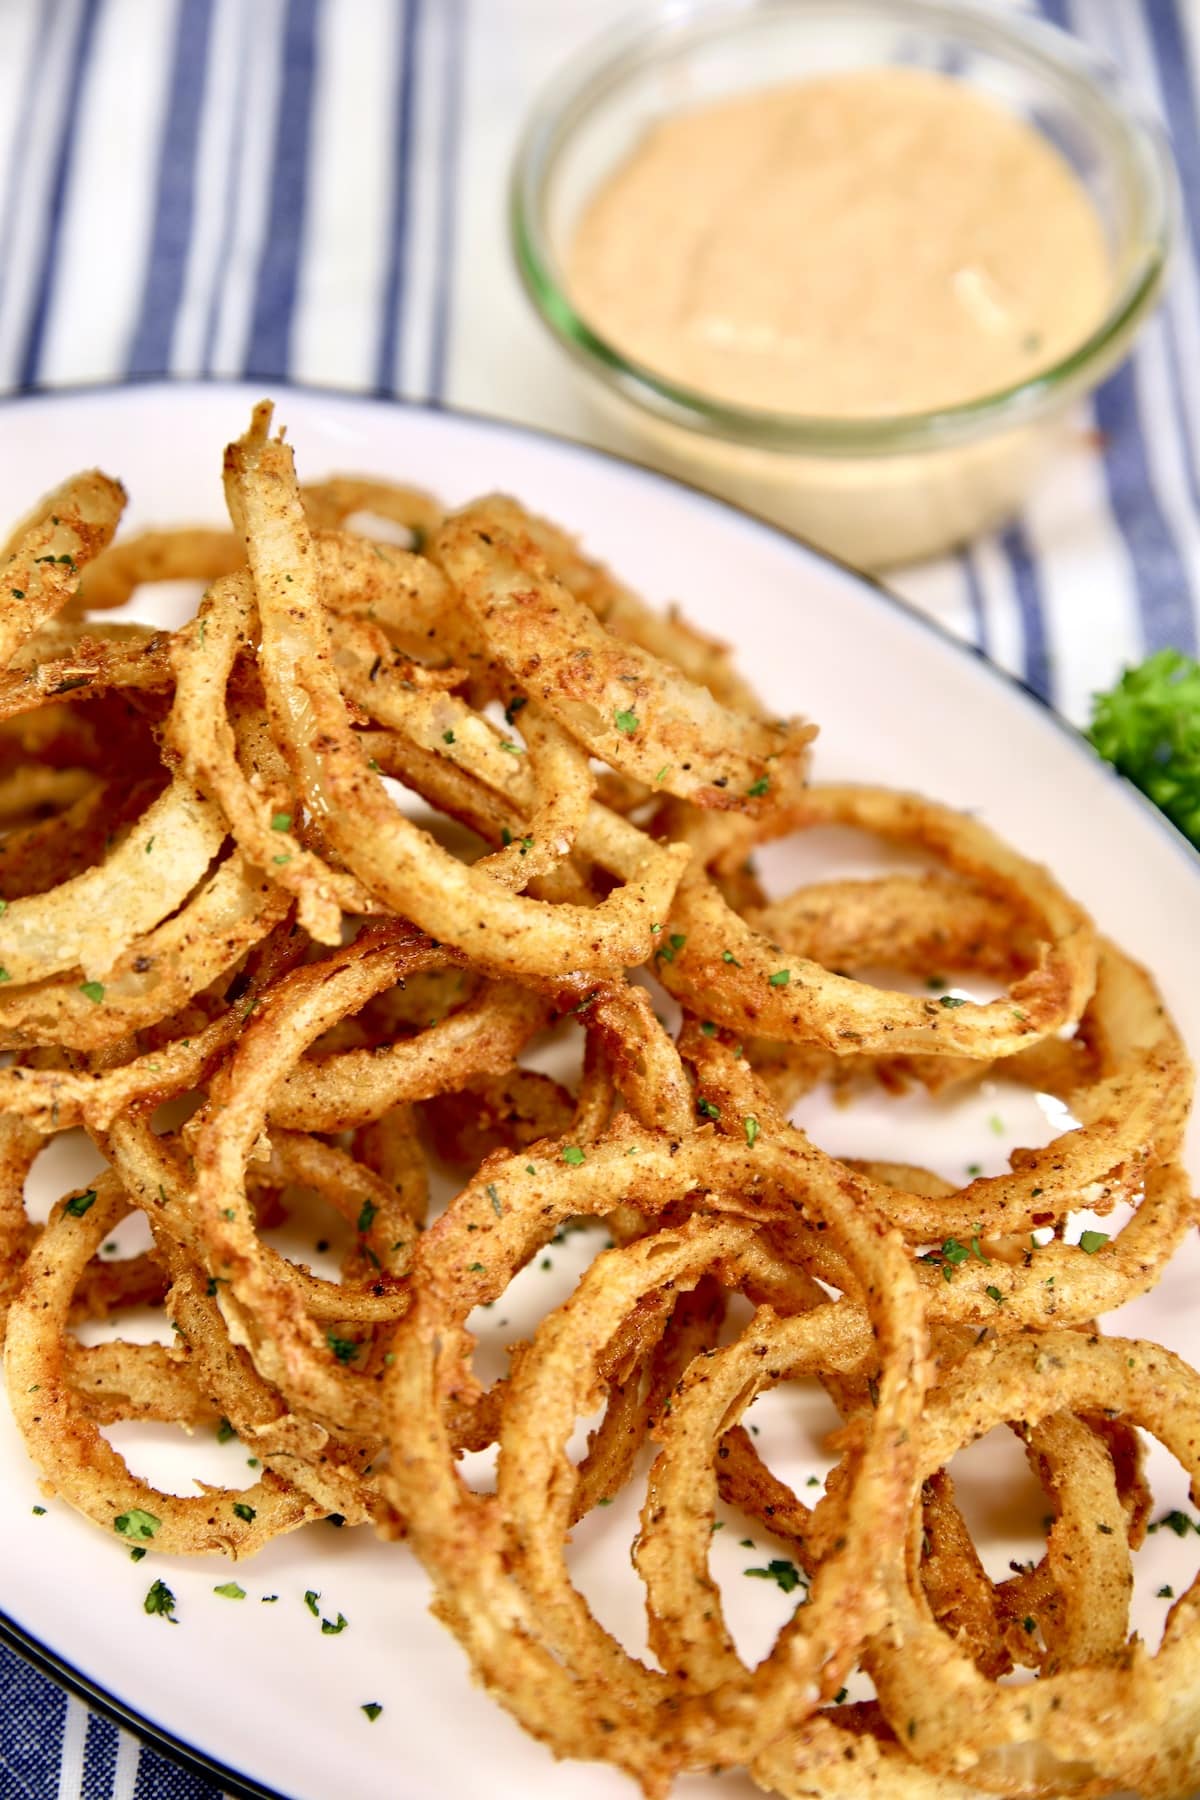 Fried onion rings on a platter with bowl of dipping sauce.